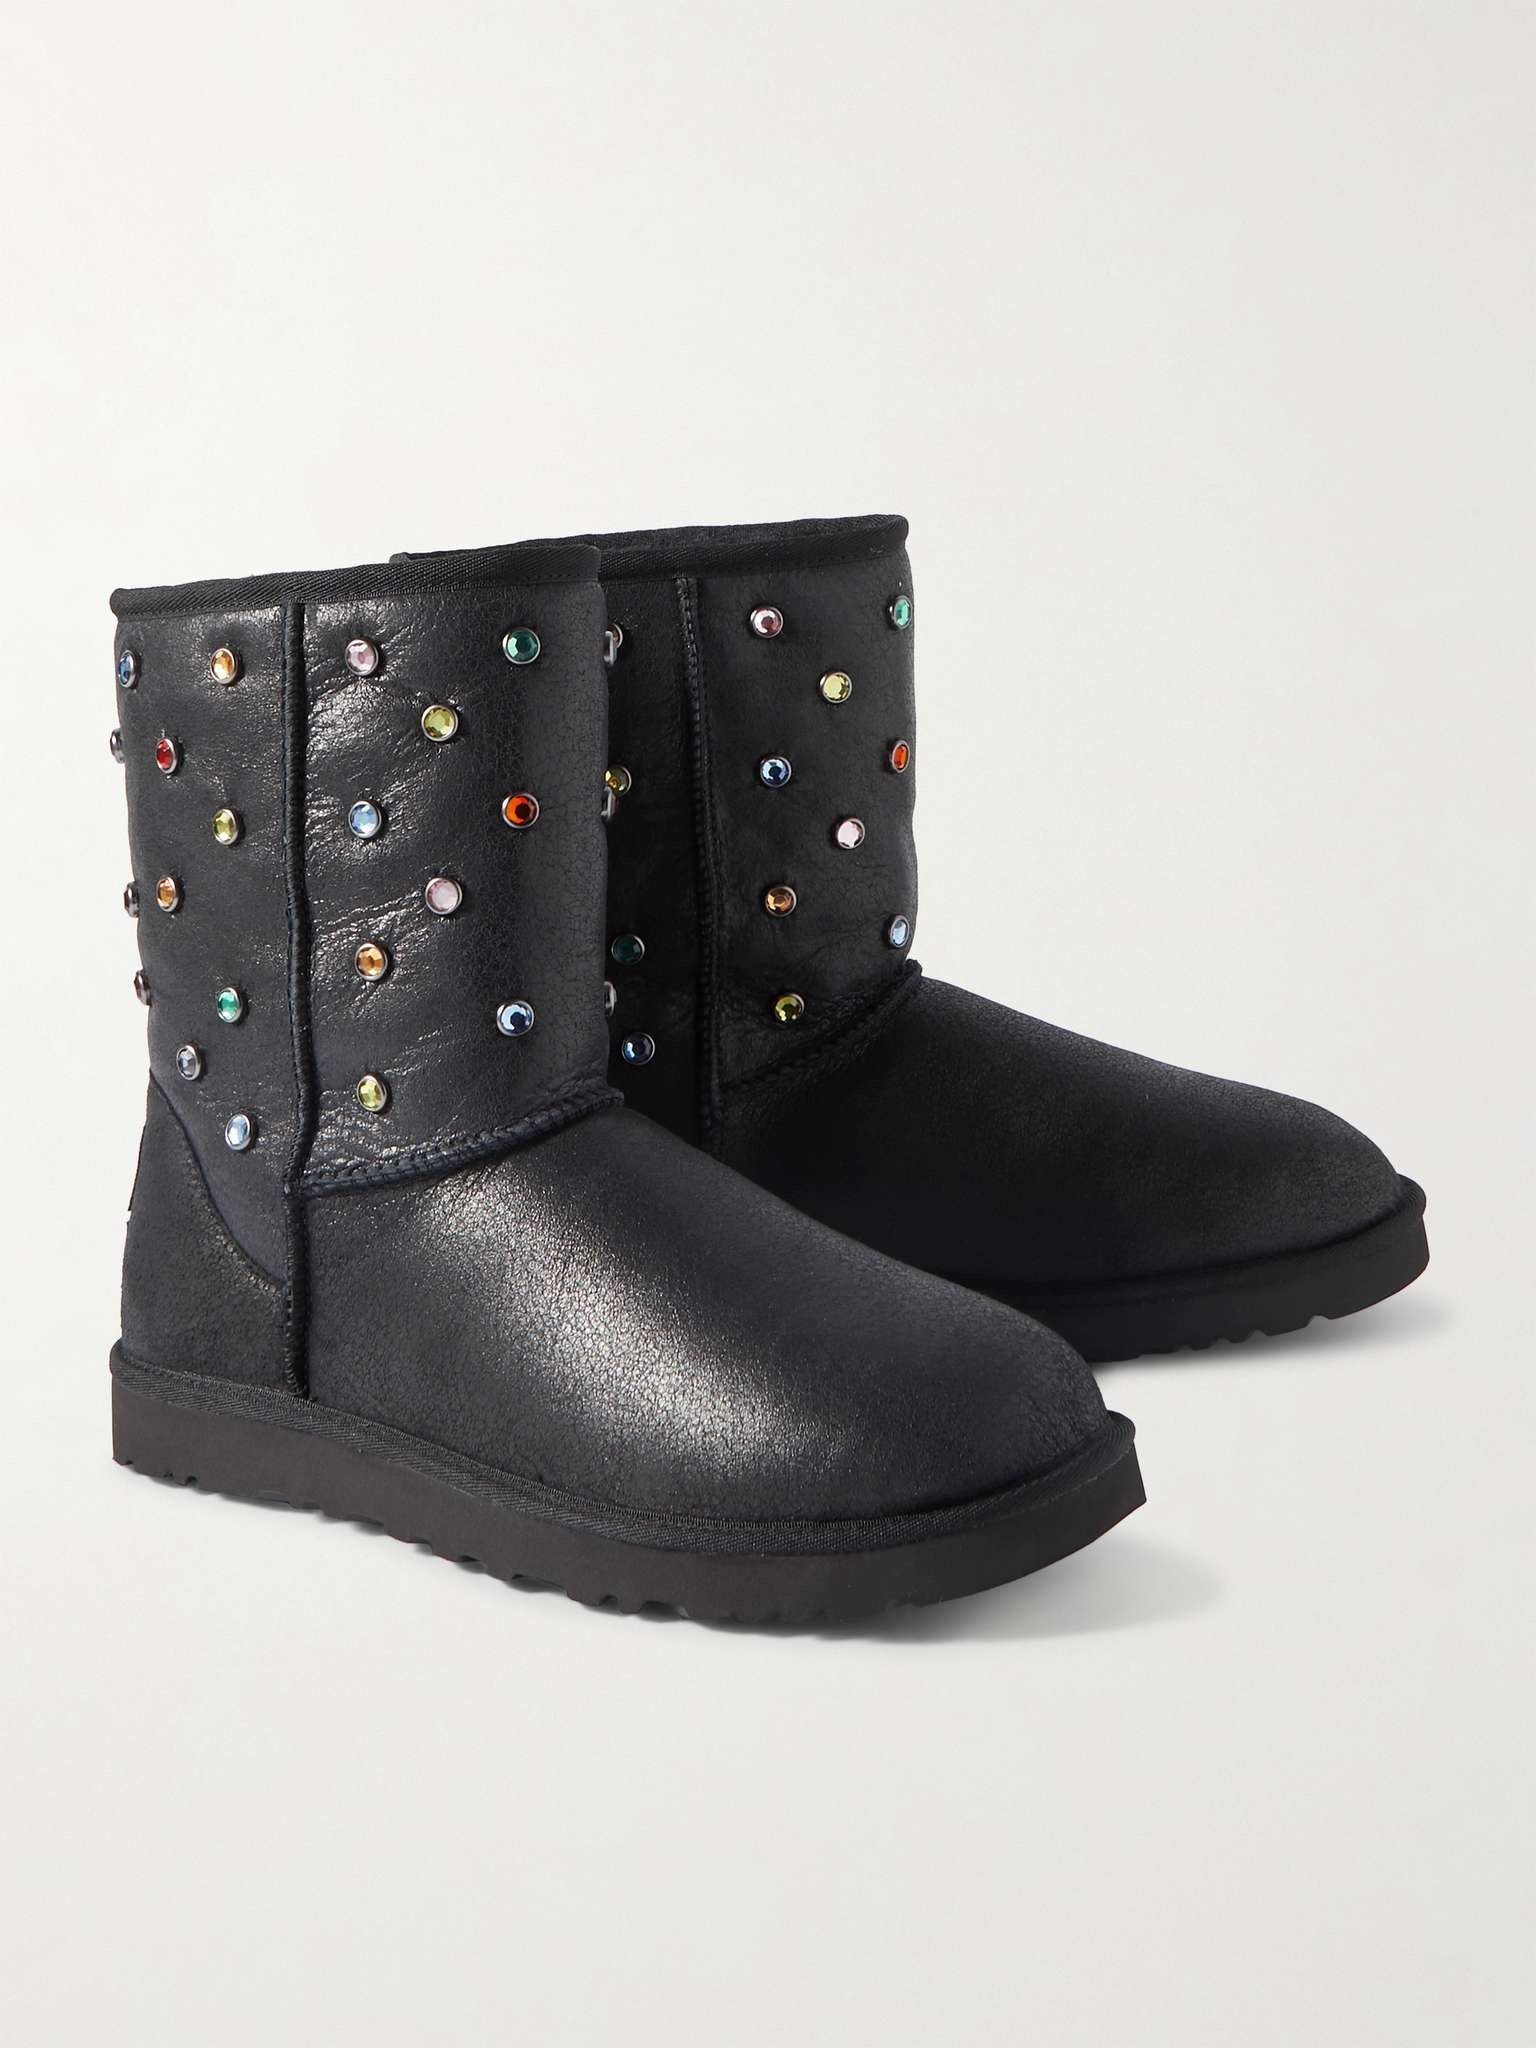 + Gallery Dept. Classic Short Regenerate Shearling-Lined Embellished Leather Boots - 4